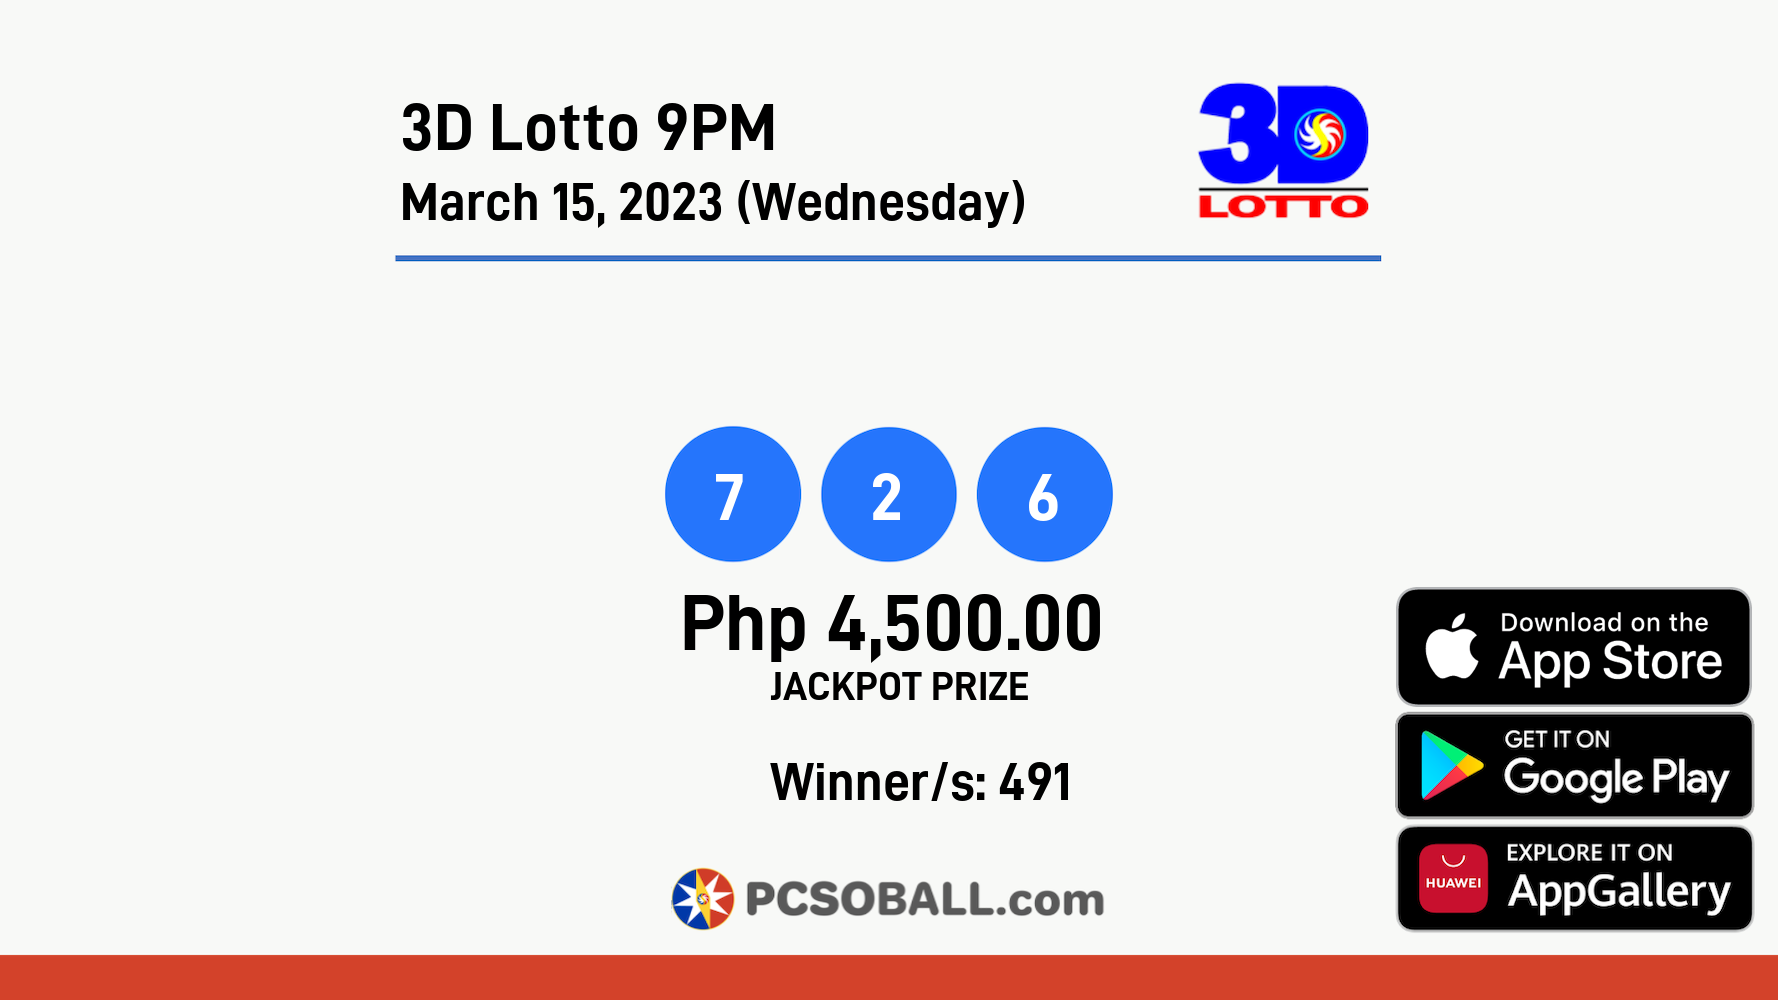 3D Lotto 9PM March 15, 2023 (Wednesday) Result